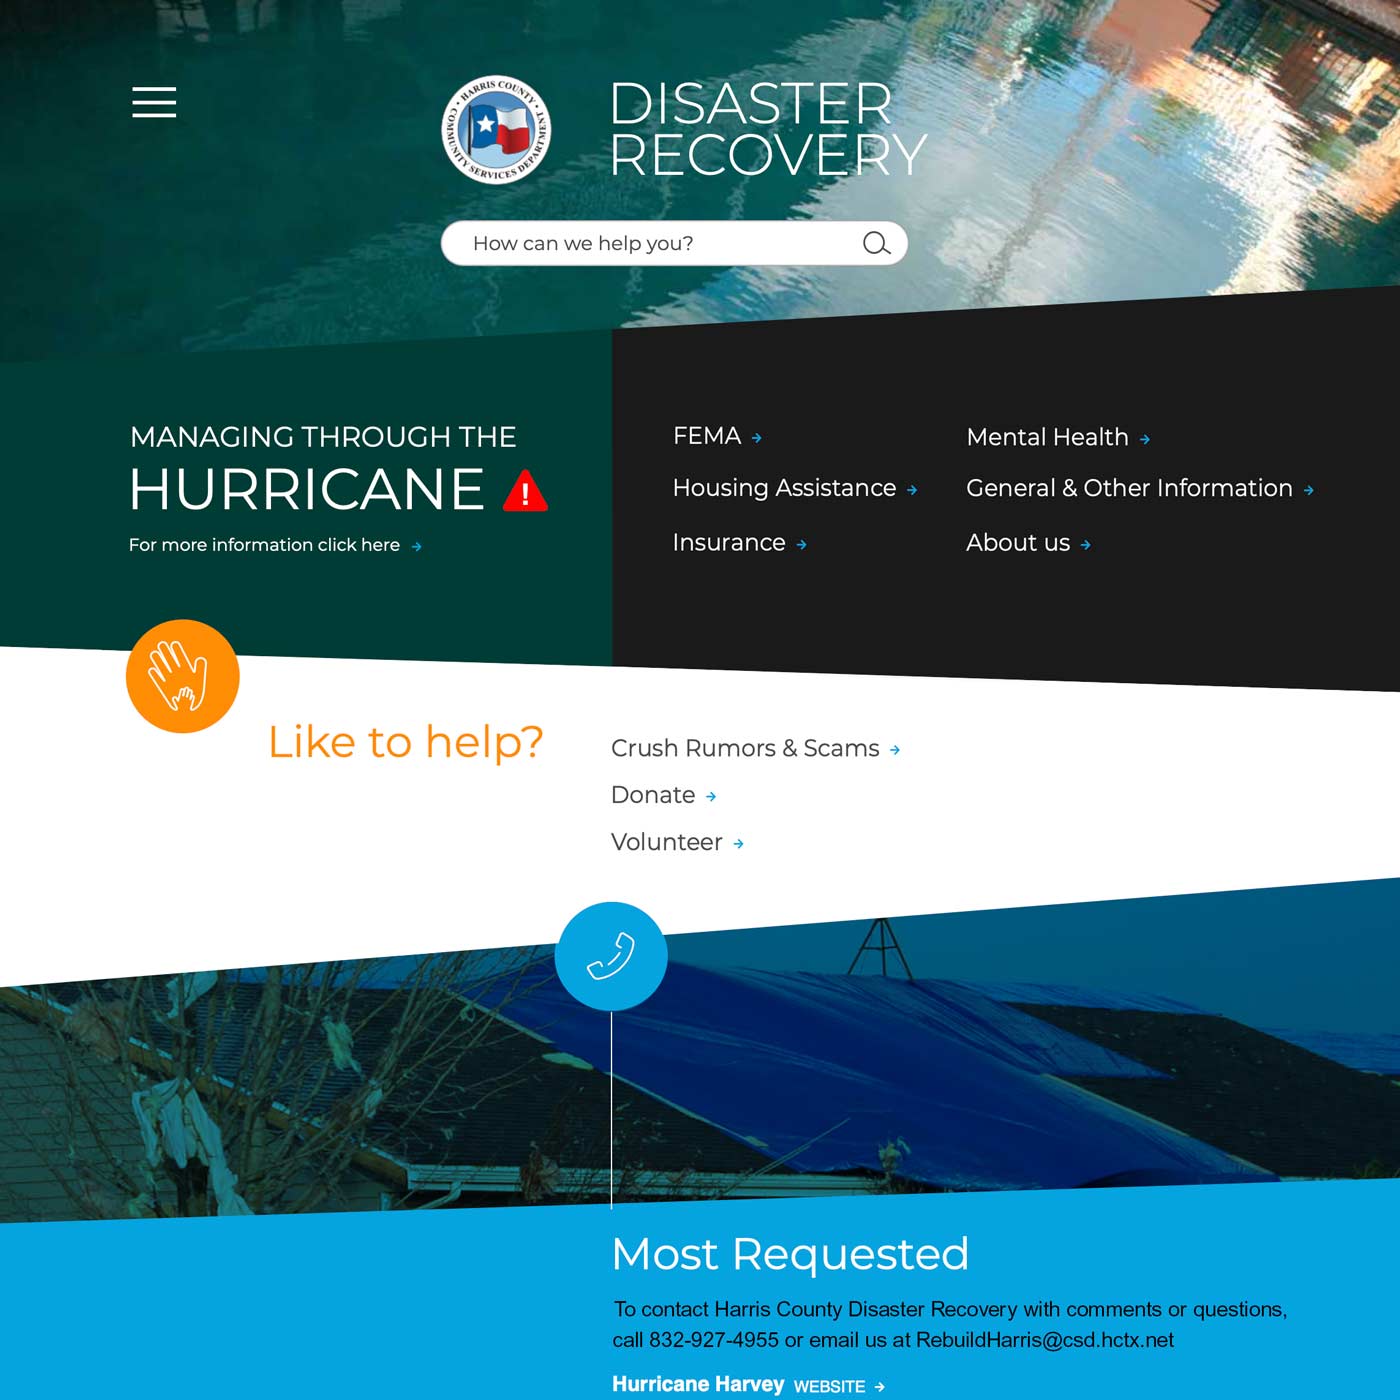 Harris County Disaster Recovery Resources website